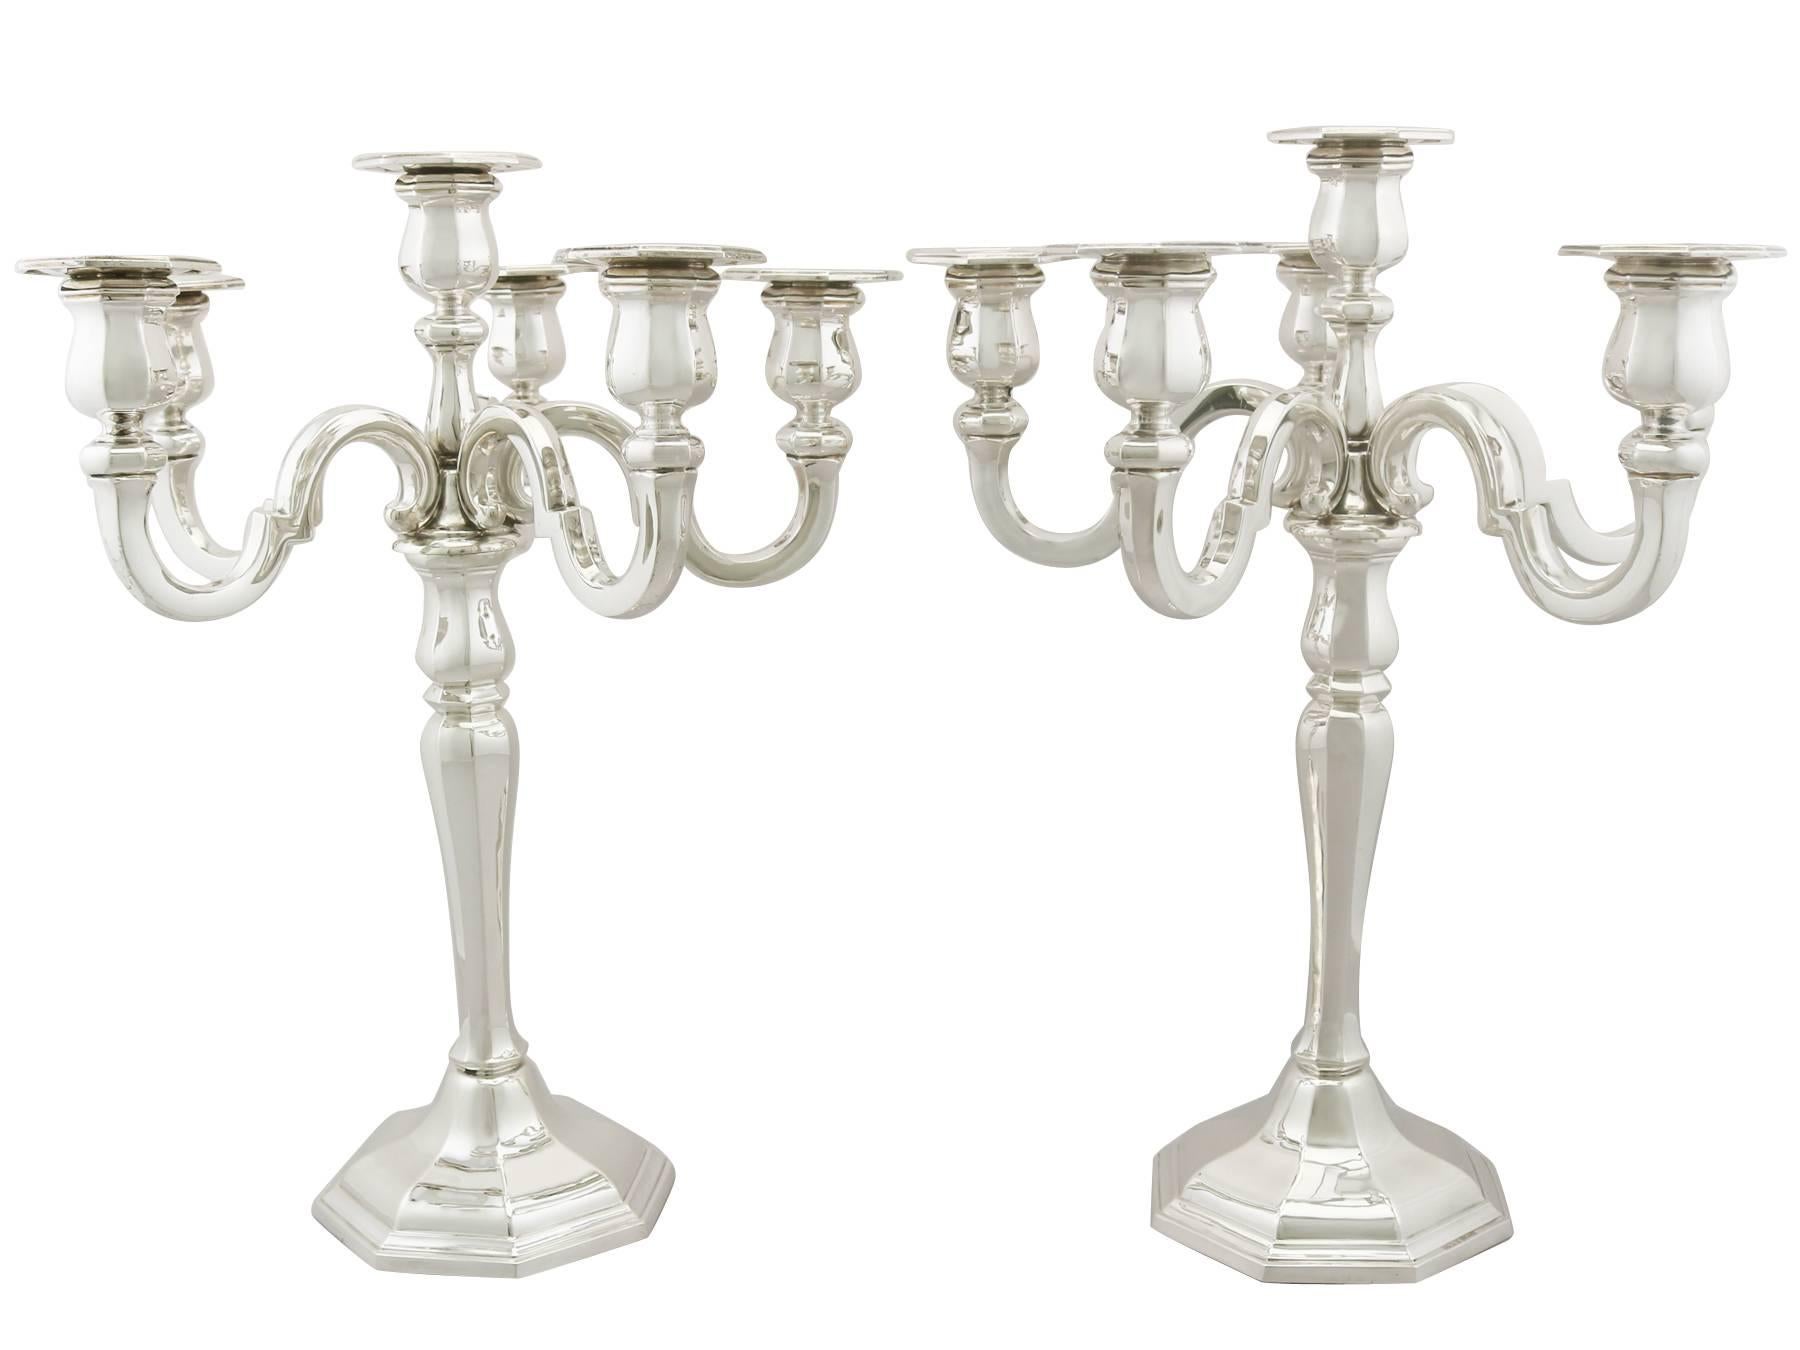 An exceptional, fine and impressive, pair of large antique German sterling silver 6 light candelabra; an addition to our ornamental continental silverware collection

These exceptional antique German six-light candelabra in sterling silver have a